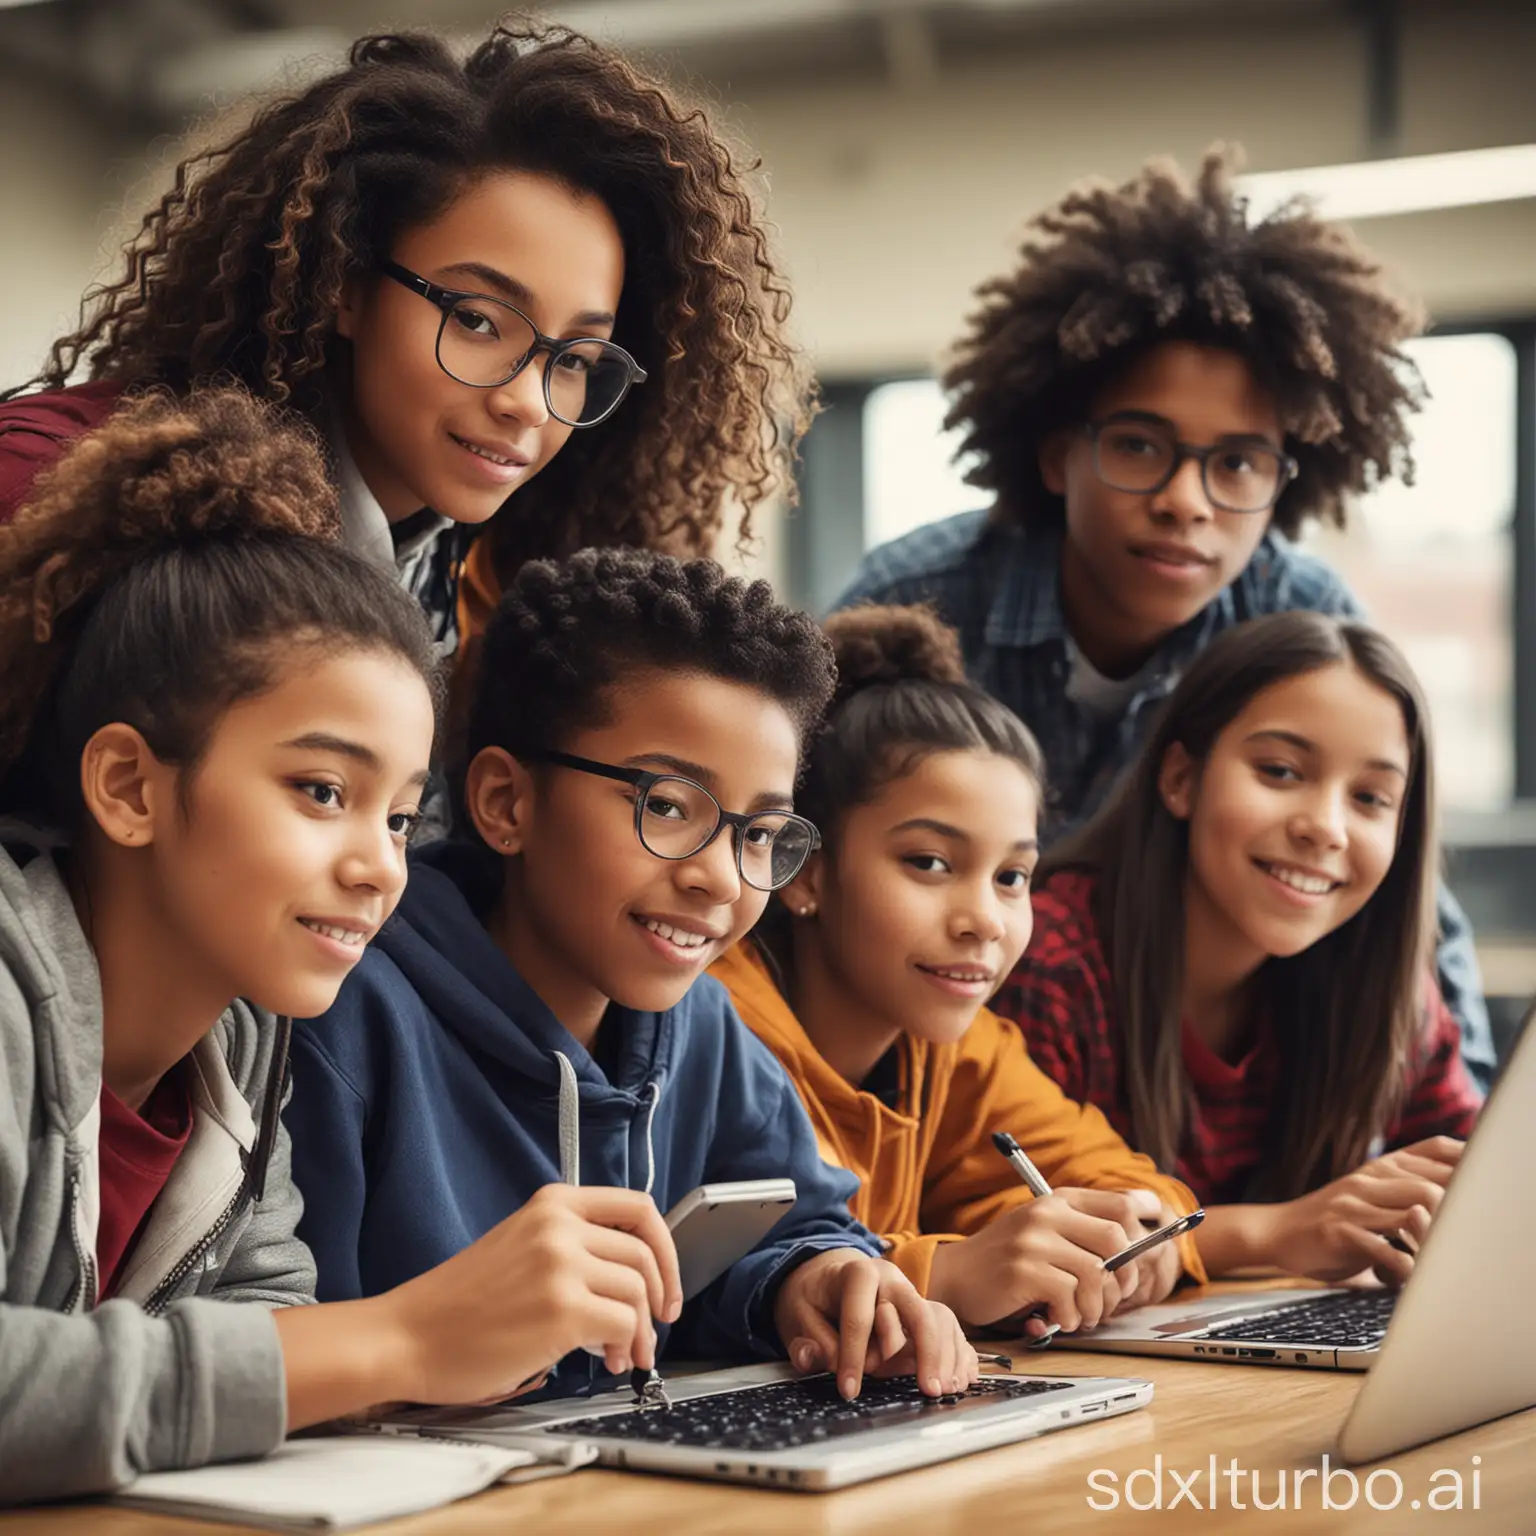 Use a modern, impactful image of diverse students engaged in learning, perhaps using technology.